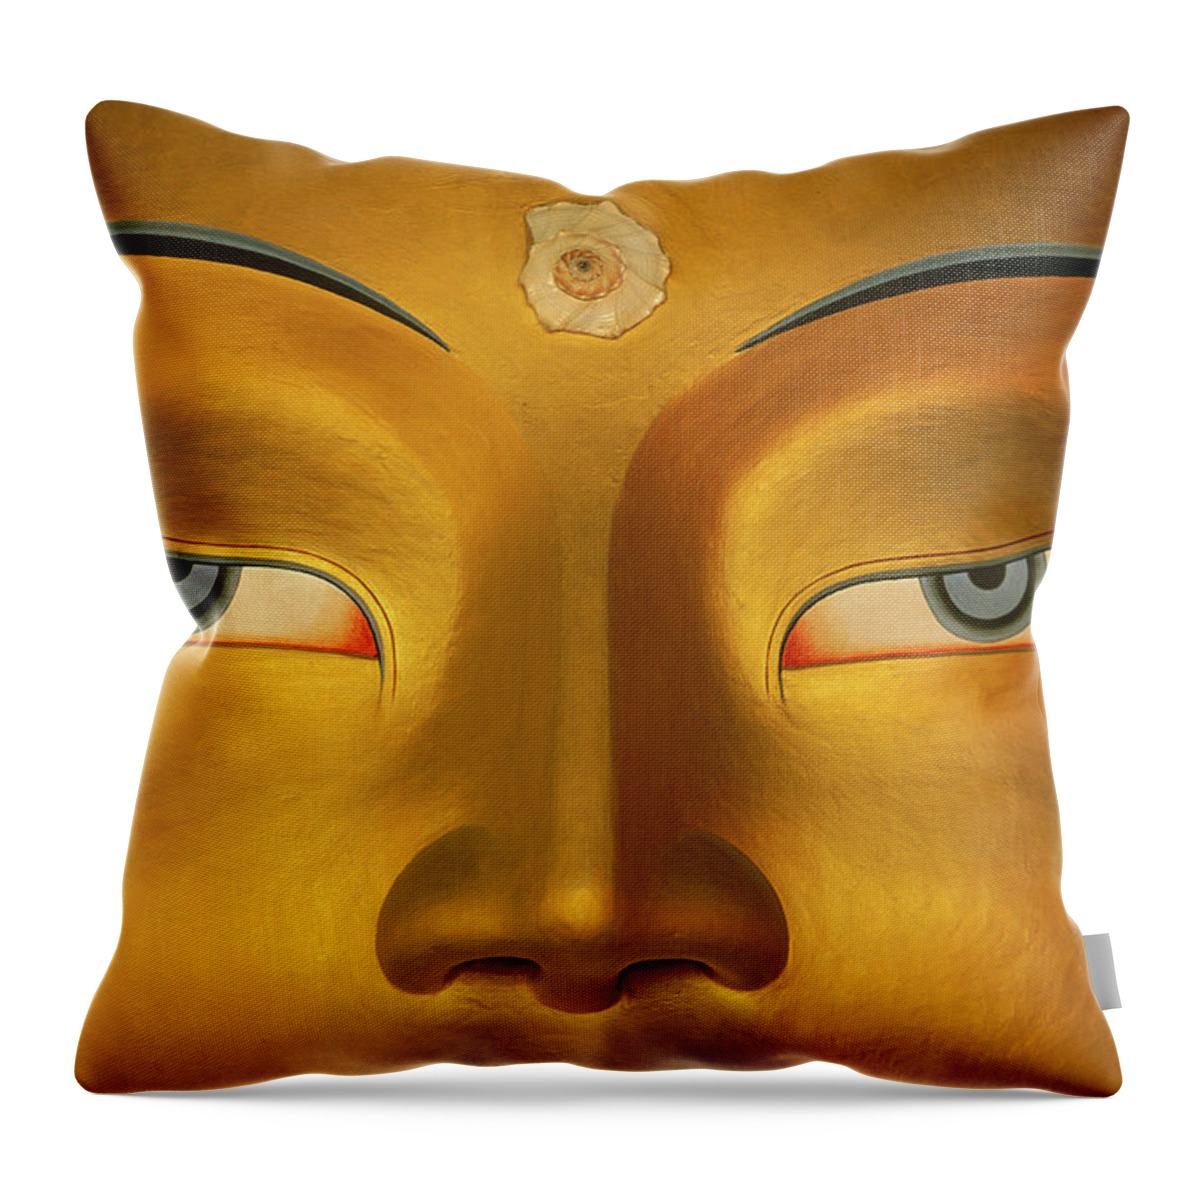 Hh Throw Pillow featuring the photograph Maitreya Close Up Of Buddha by Colin Monteath